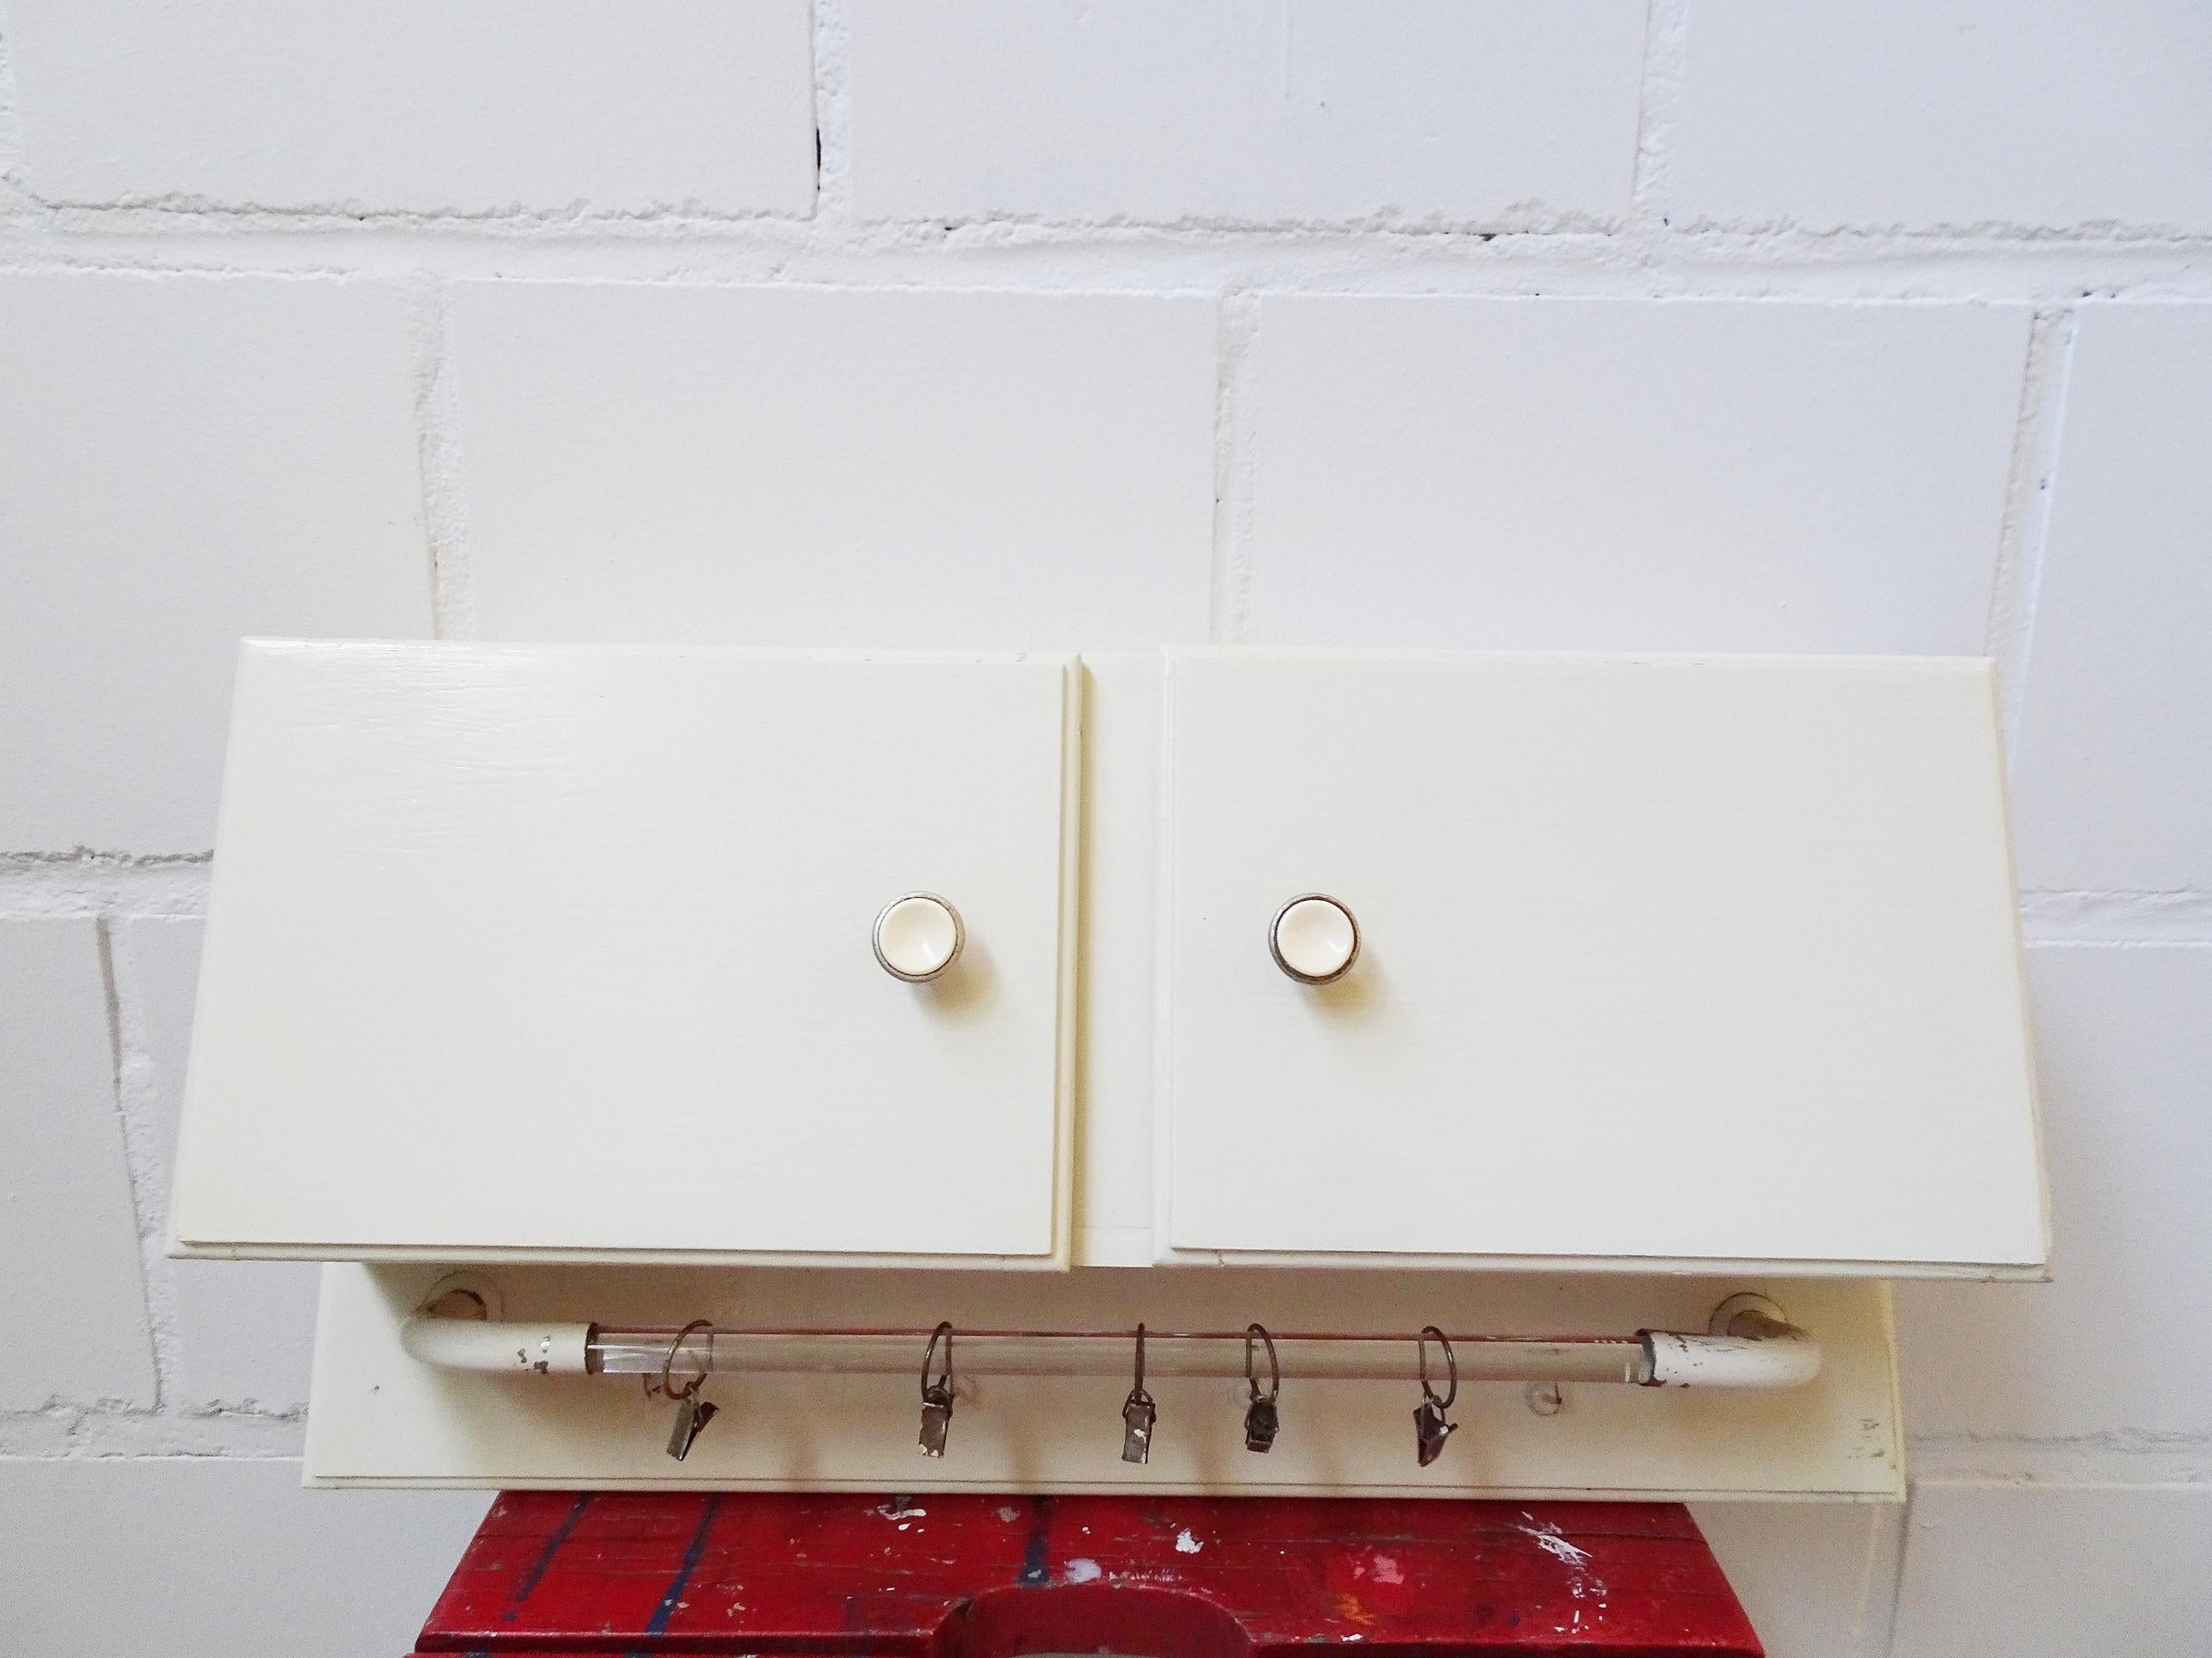 This small wall cabinet is a kitchen cabinet from the early 1930s. The cream white softwood wall cabinet features a spacious interior with two bakelite doorhandles, as well as a large glass hook rack with five clips and four additional hooks. A